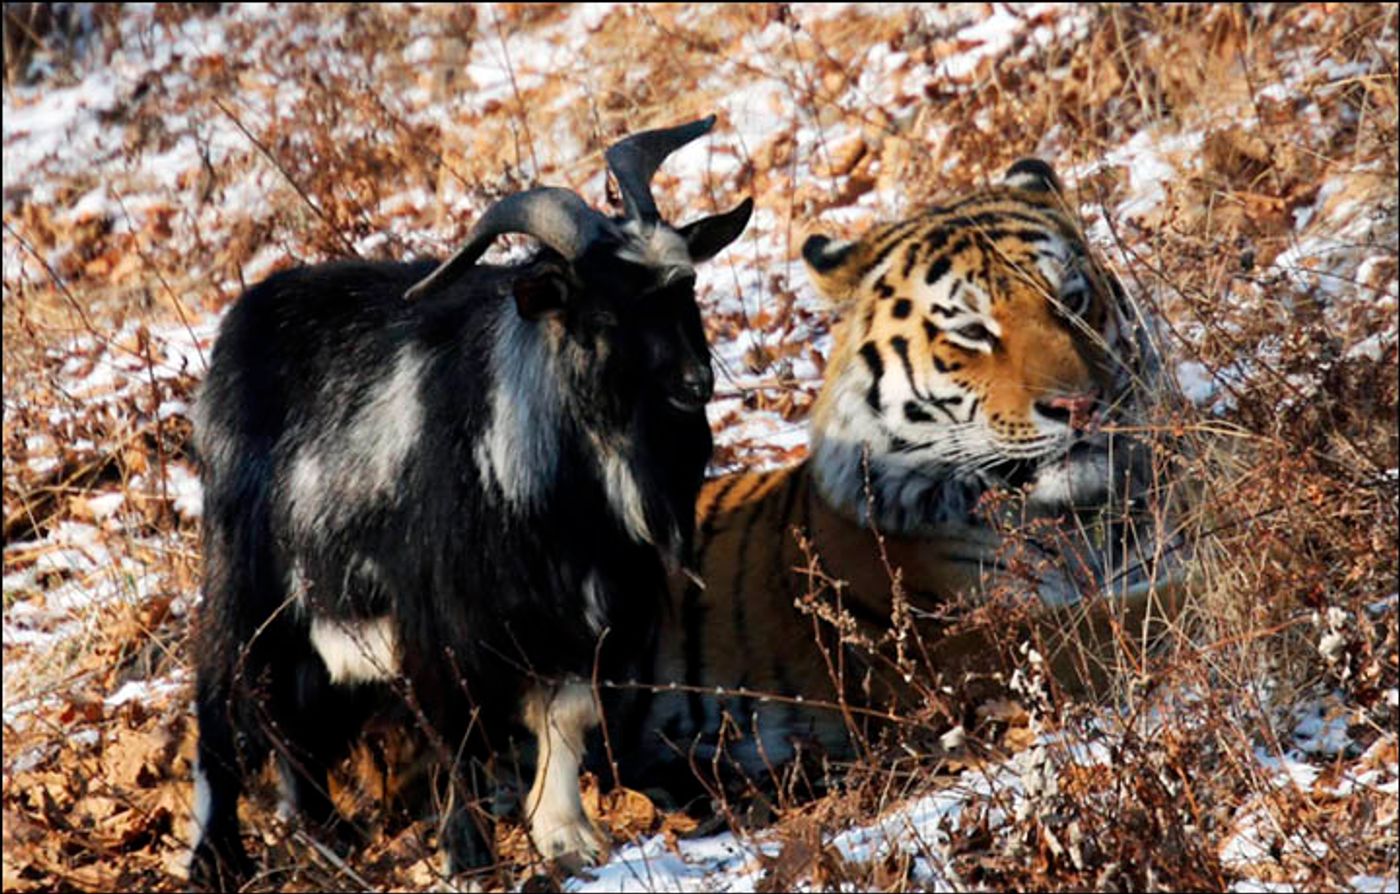 Timur, the goat on the left, beside Amur, the tiger on the right.